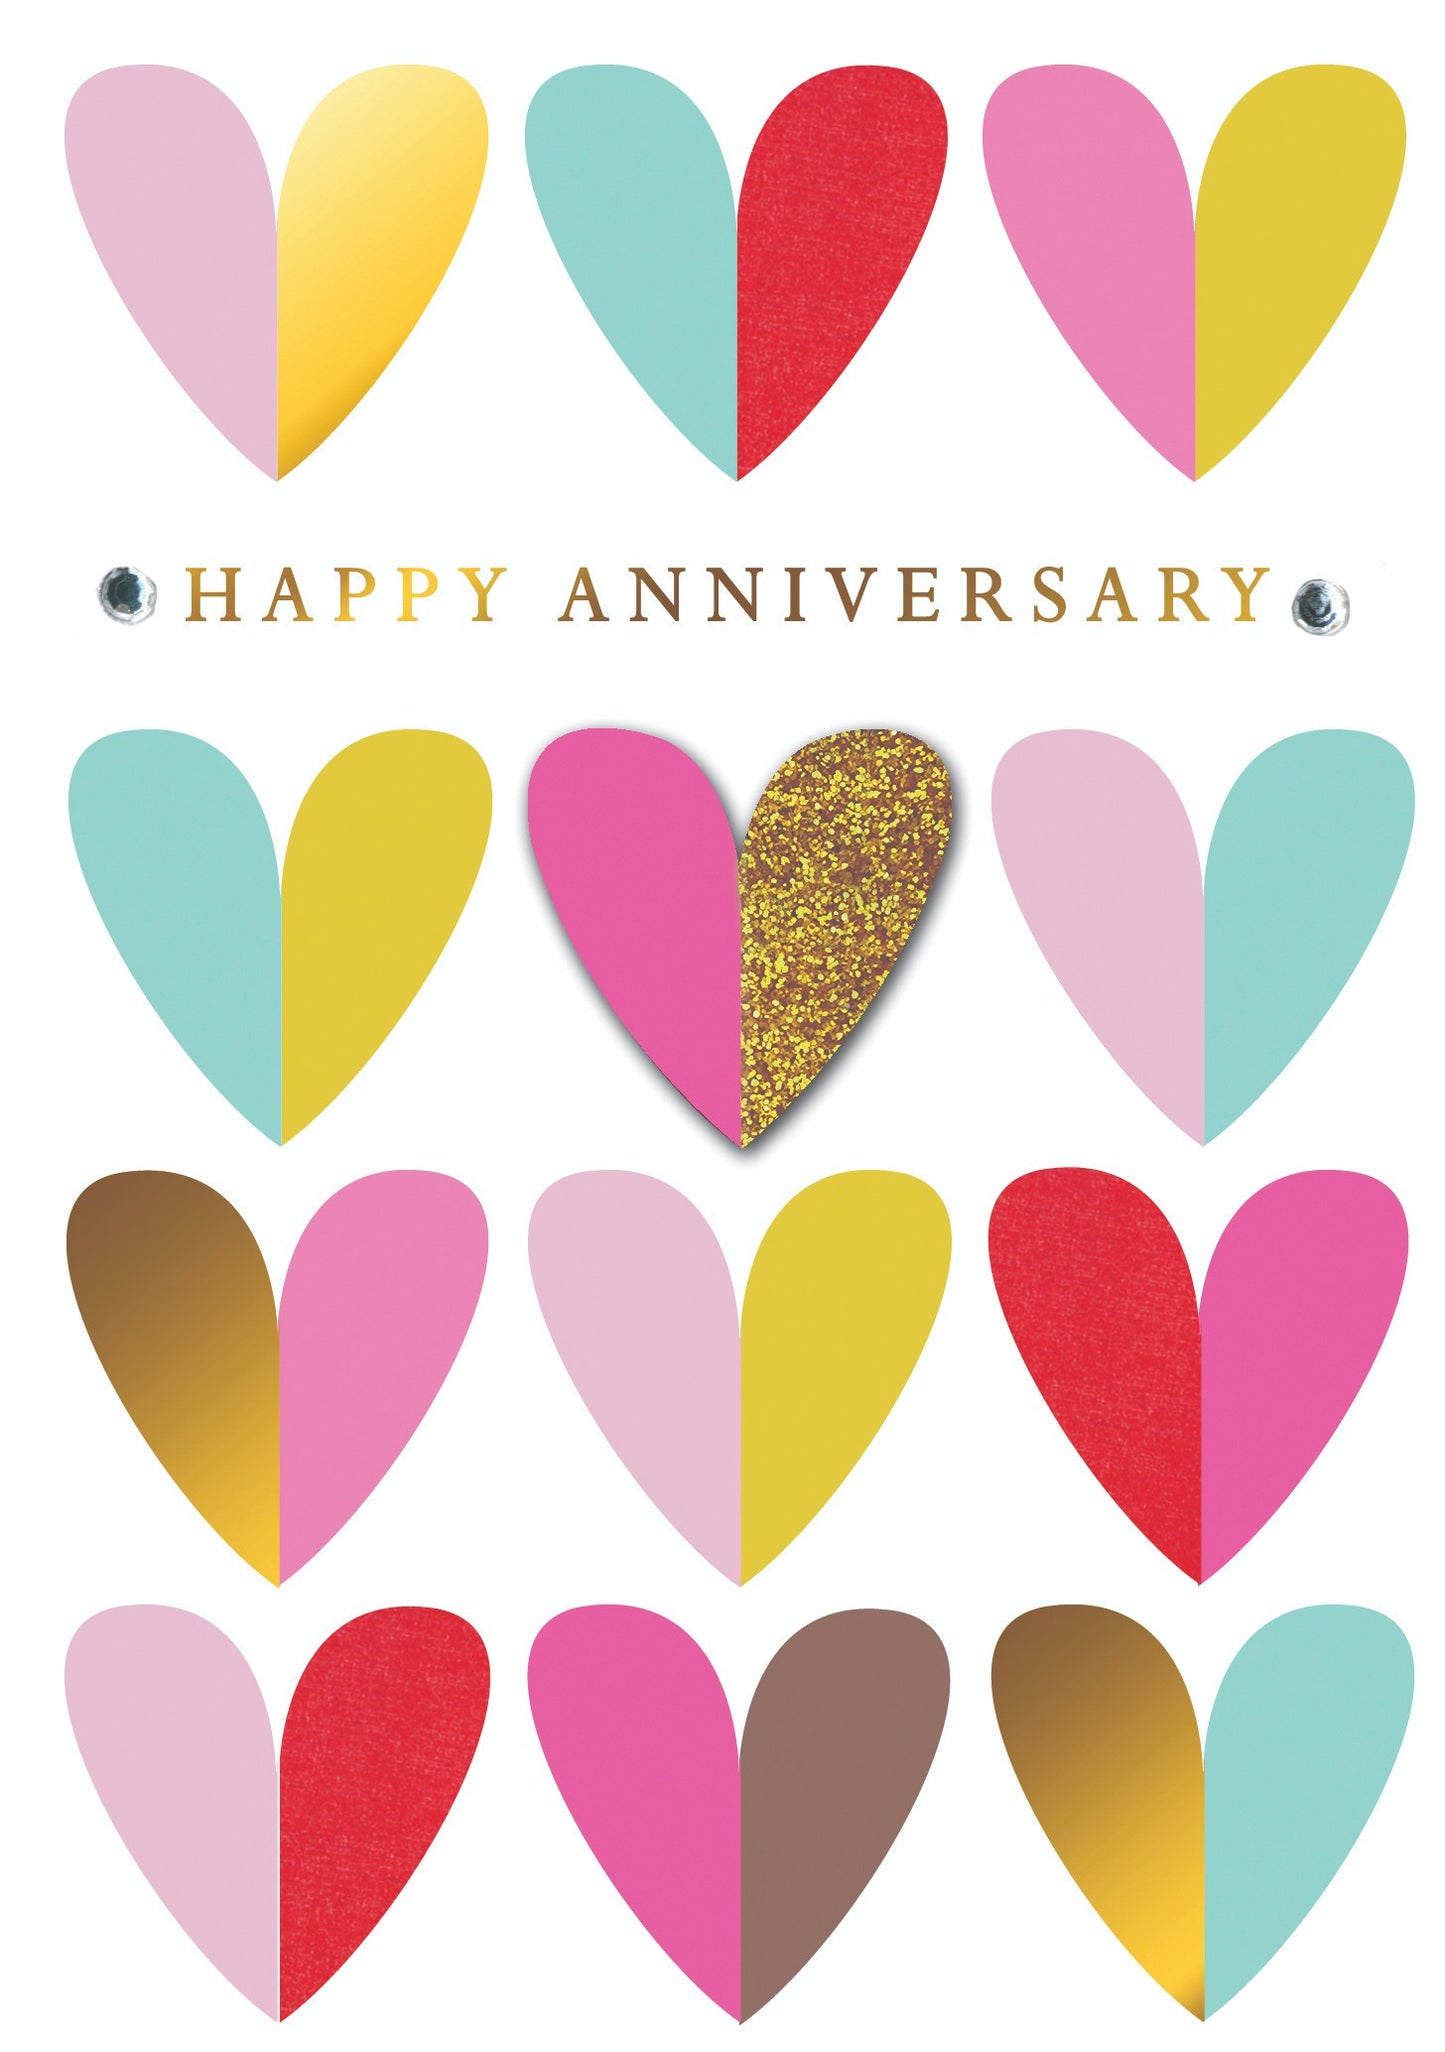 Colourful Hearts Happy Anniversary Greeting Card